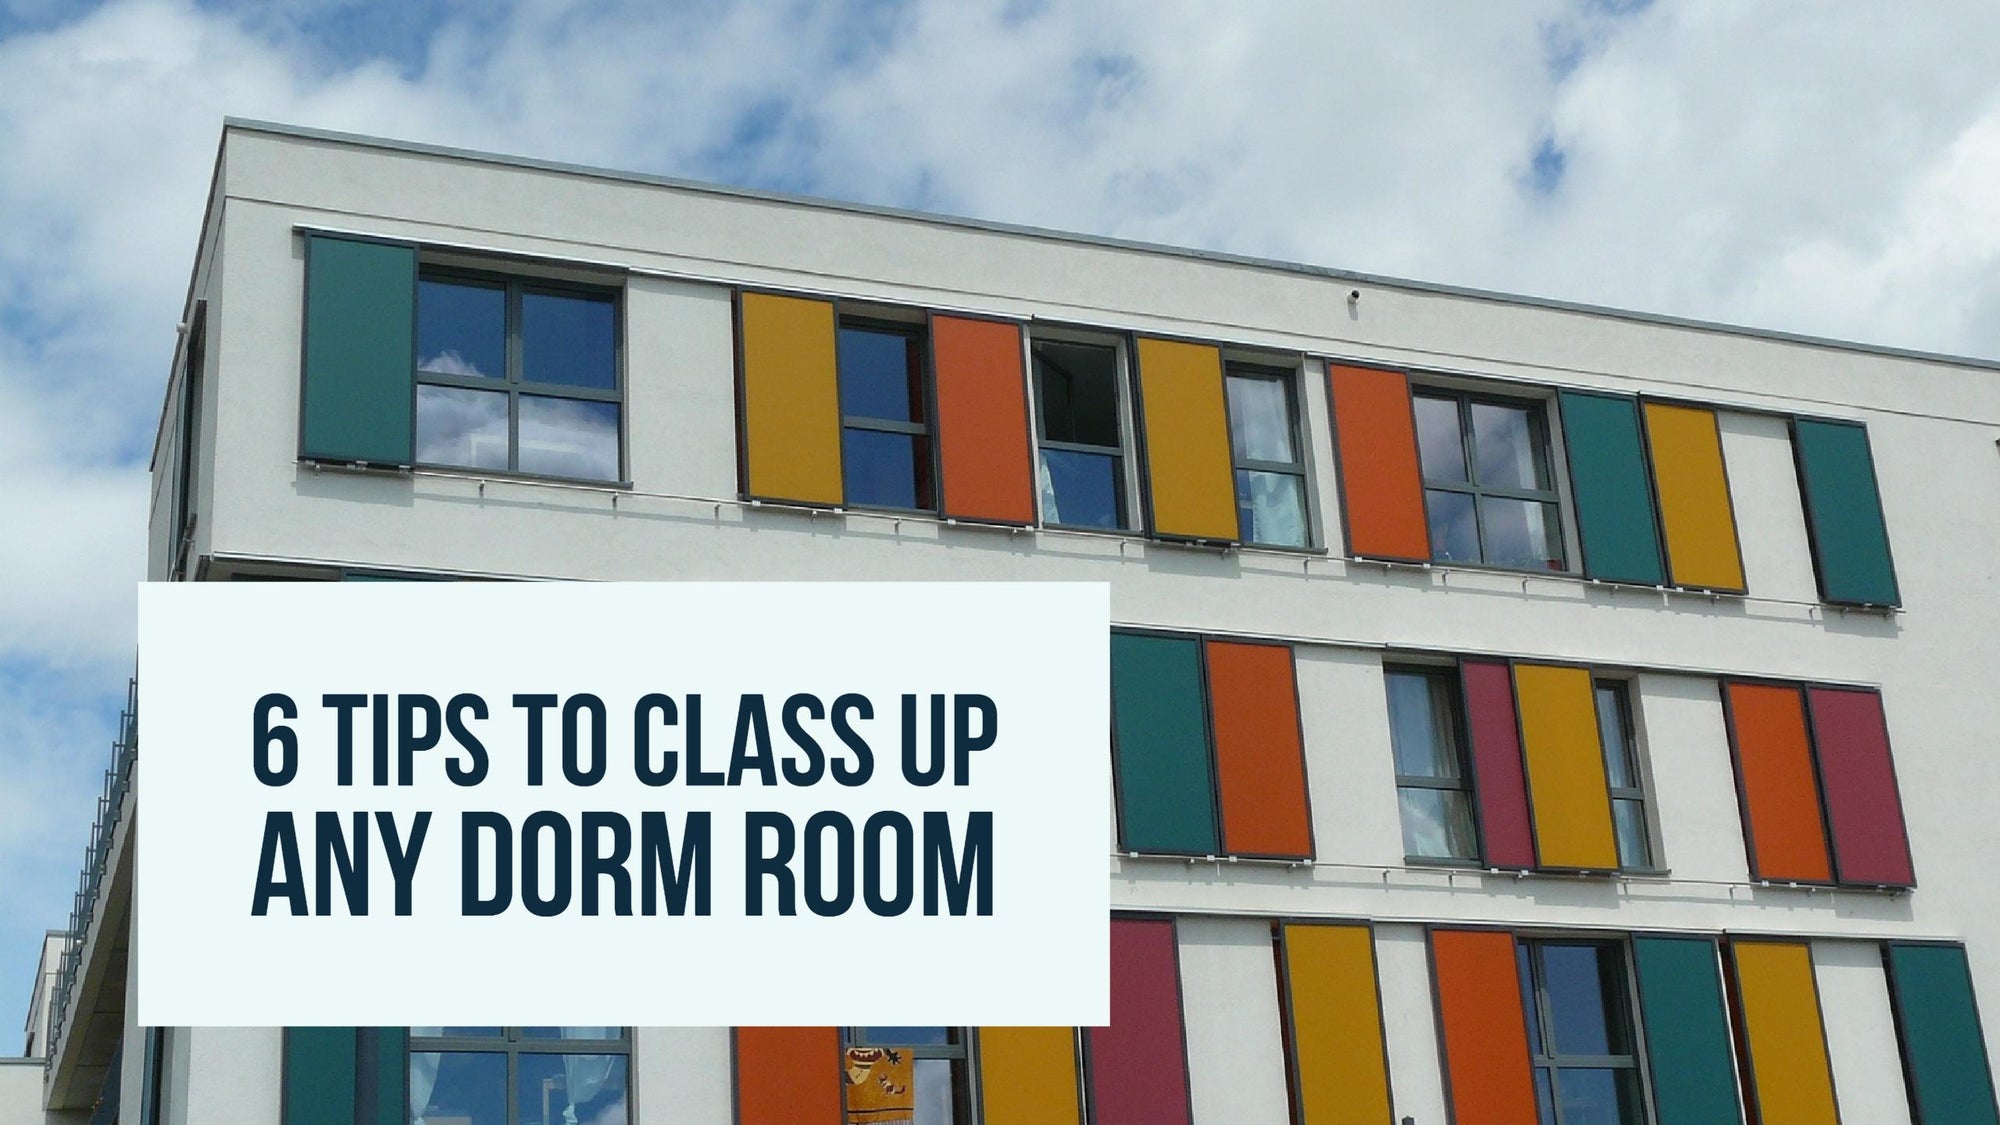 How To Class Up Any Dorm Room